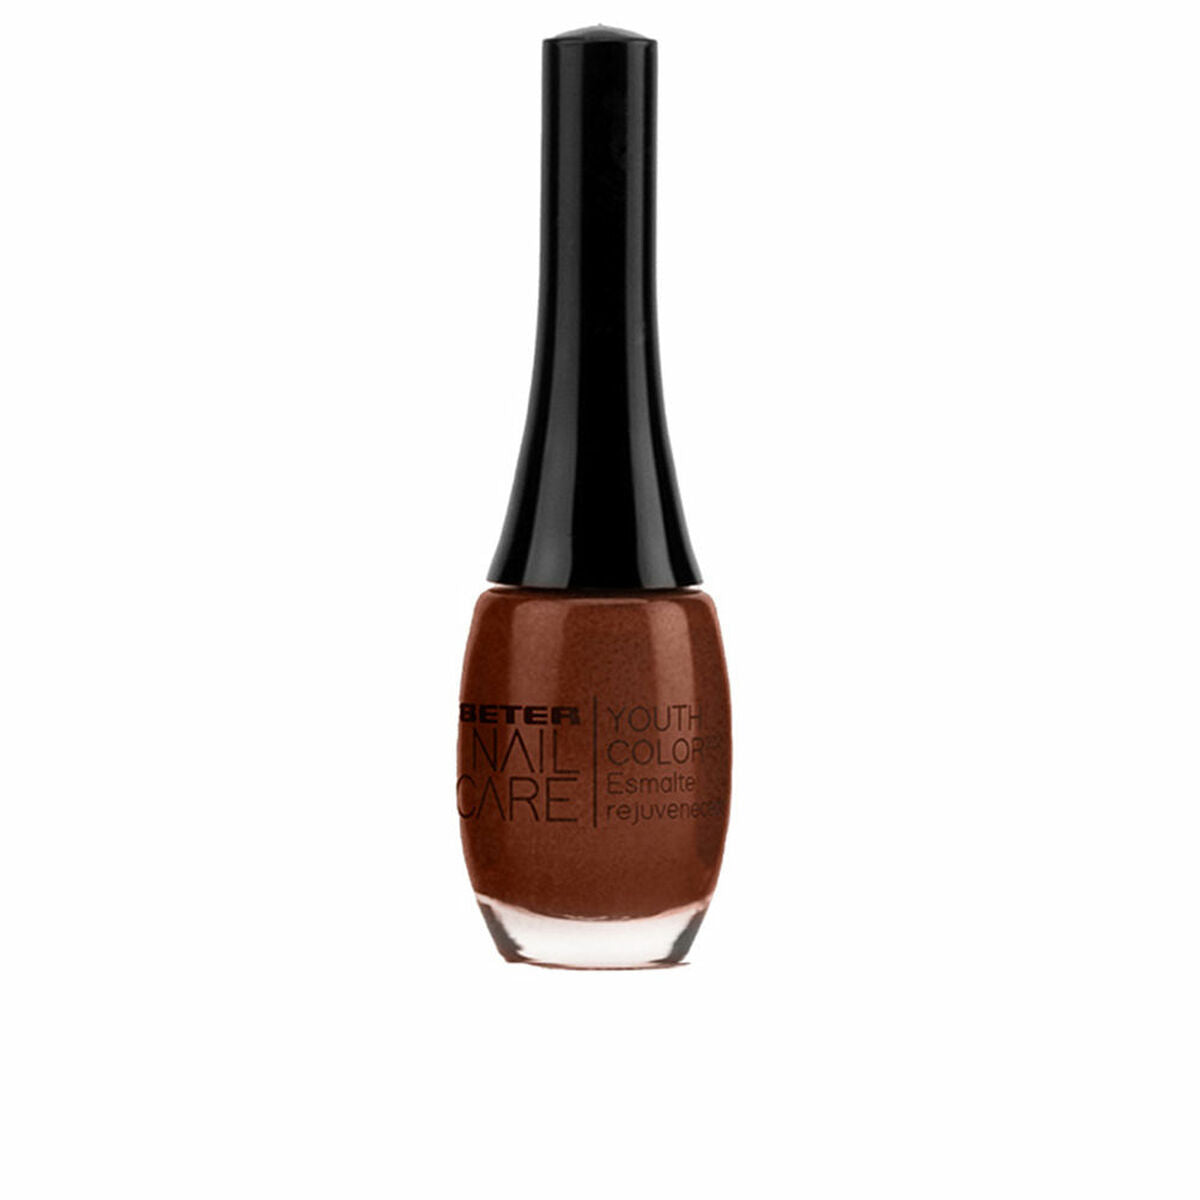 Nail polish Beter Nail Care Youth Color Nº 231 Pop star 11 ml - Calm Beauty IE